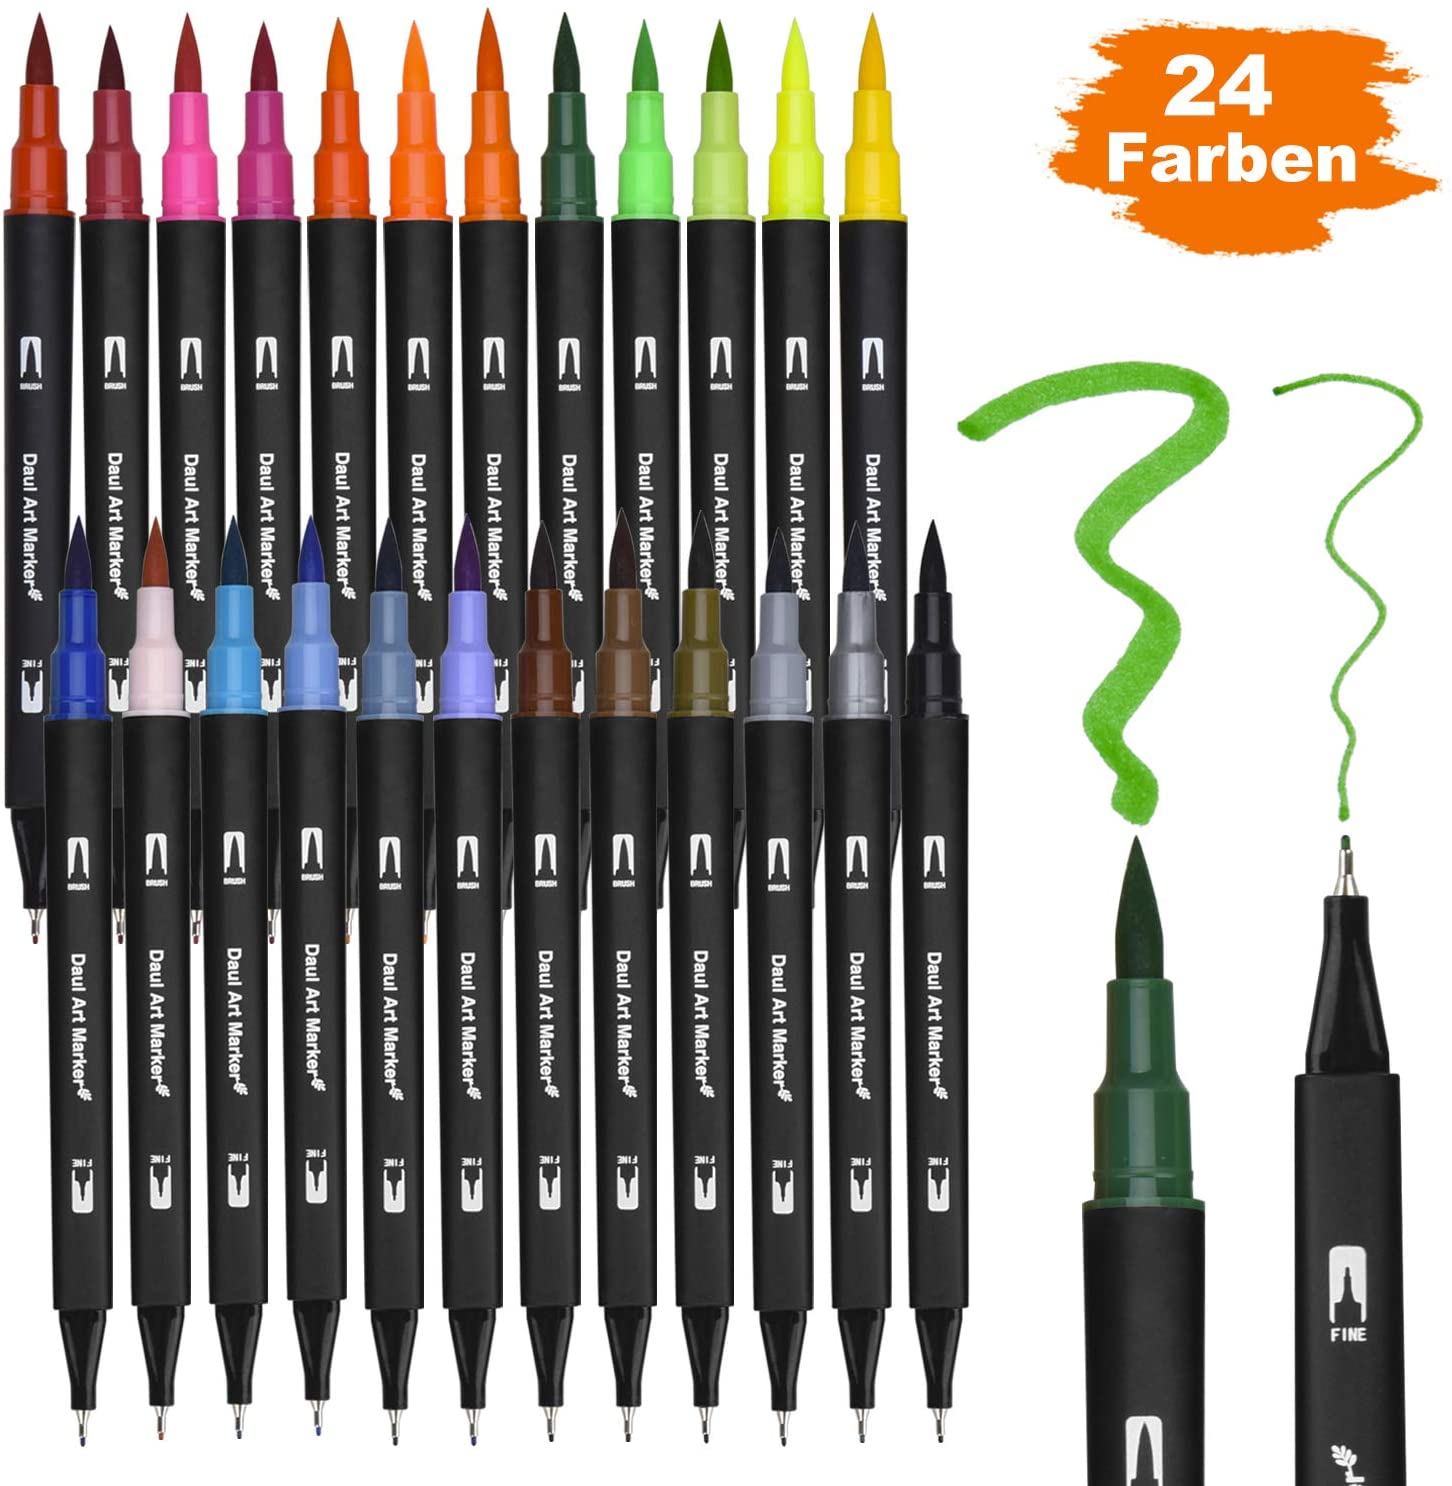 Dual Brush Marker Pens for Coloring Books，Brush Pen Set 24 colors 0.4mm-2mm  with 2 different tips Bullet Journal water-based paint pens Art Marker